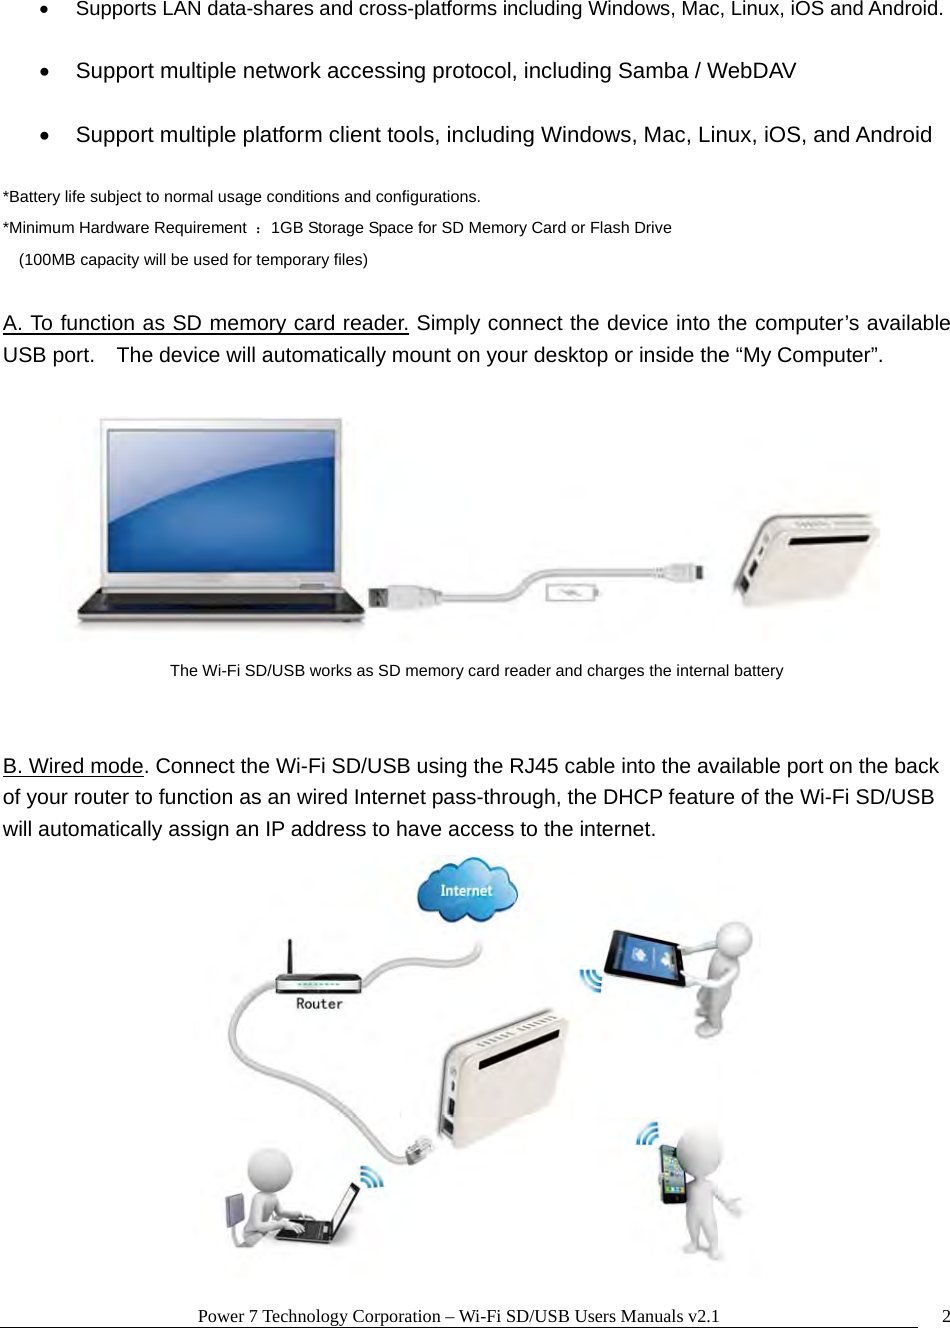 Power 7 Technology Corporation – Wi-Fi SD/USB Users Manuals v2.1  2  Supports LAN data-shares and cross-platforms including Windows, Mac, Linux, iOS and Android.    Support multiple network accessing protocol, including Samba / WebDAV    Support multiple platform client tools, including Windows, Mac, Linux, iOS, and Android  *Battery life subject to normal usage conditions and configurations. *Minimum Hardware Requirement  ：1GB Storage Space for SD Memory Card or Flash Drive  (100MB capacity will be used for temporary files)  A. To function as SD memory card reader. Simply connect the device into the computer’s available USB port.    The device will automatically mount on your desktop or inside the “My Computer”.       The Wi-Fi SD/USB works as SD memory card reader and charges the internal battery   B. Wired mode. Connect the Wi-Fi SD/USB using the RJ45 cable into the available port on the back of your router to function as an wired Internet pass-through, the DHCP feature of the Wi-Fi SD/USB will automatically assign an IP address to have access to the internet.  